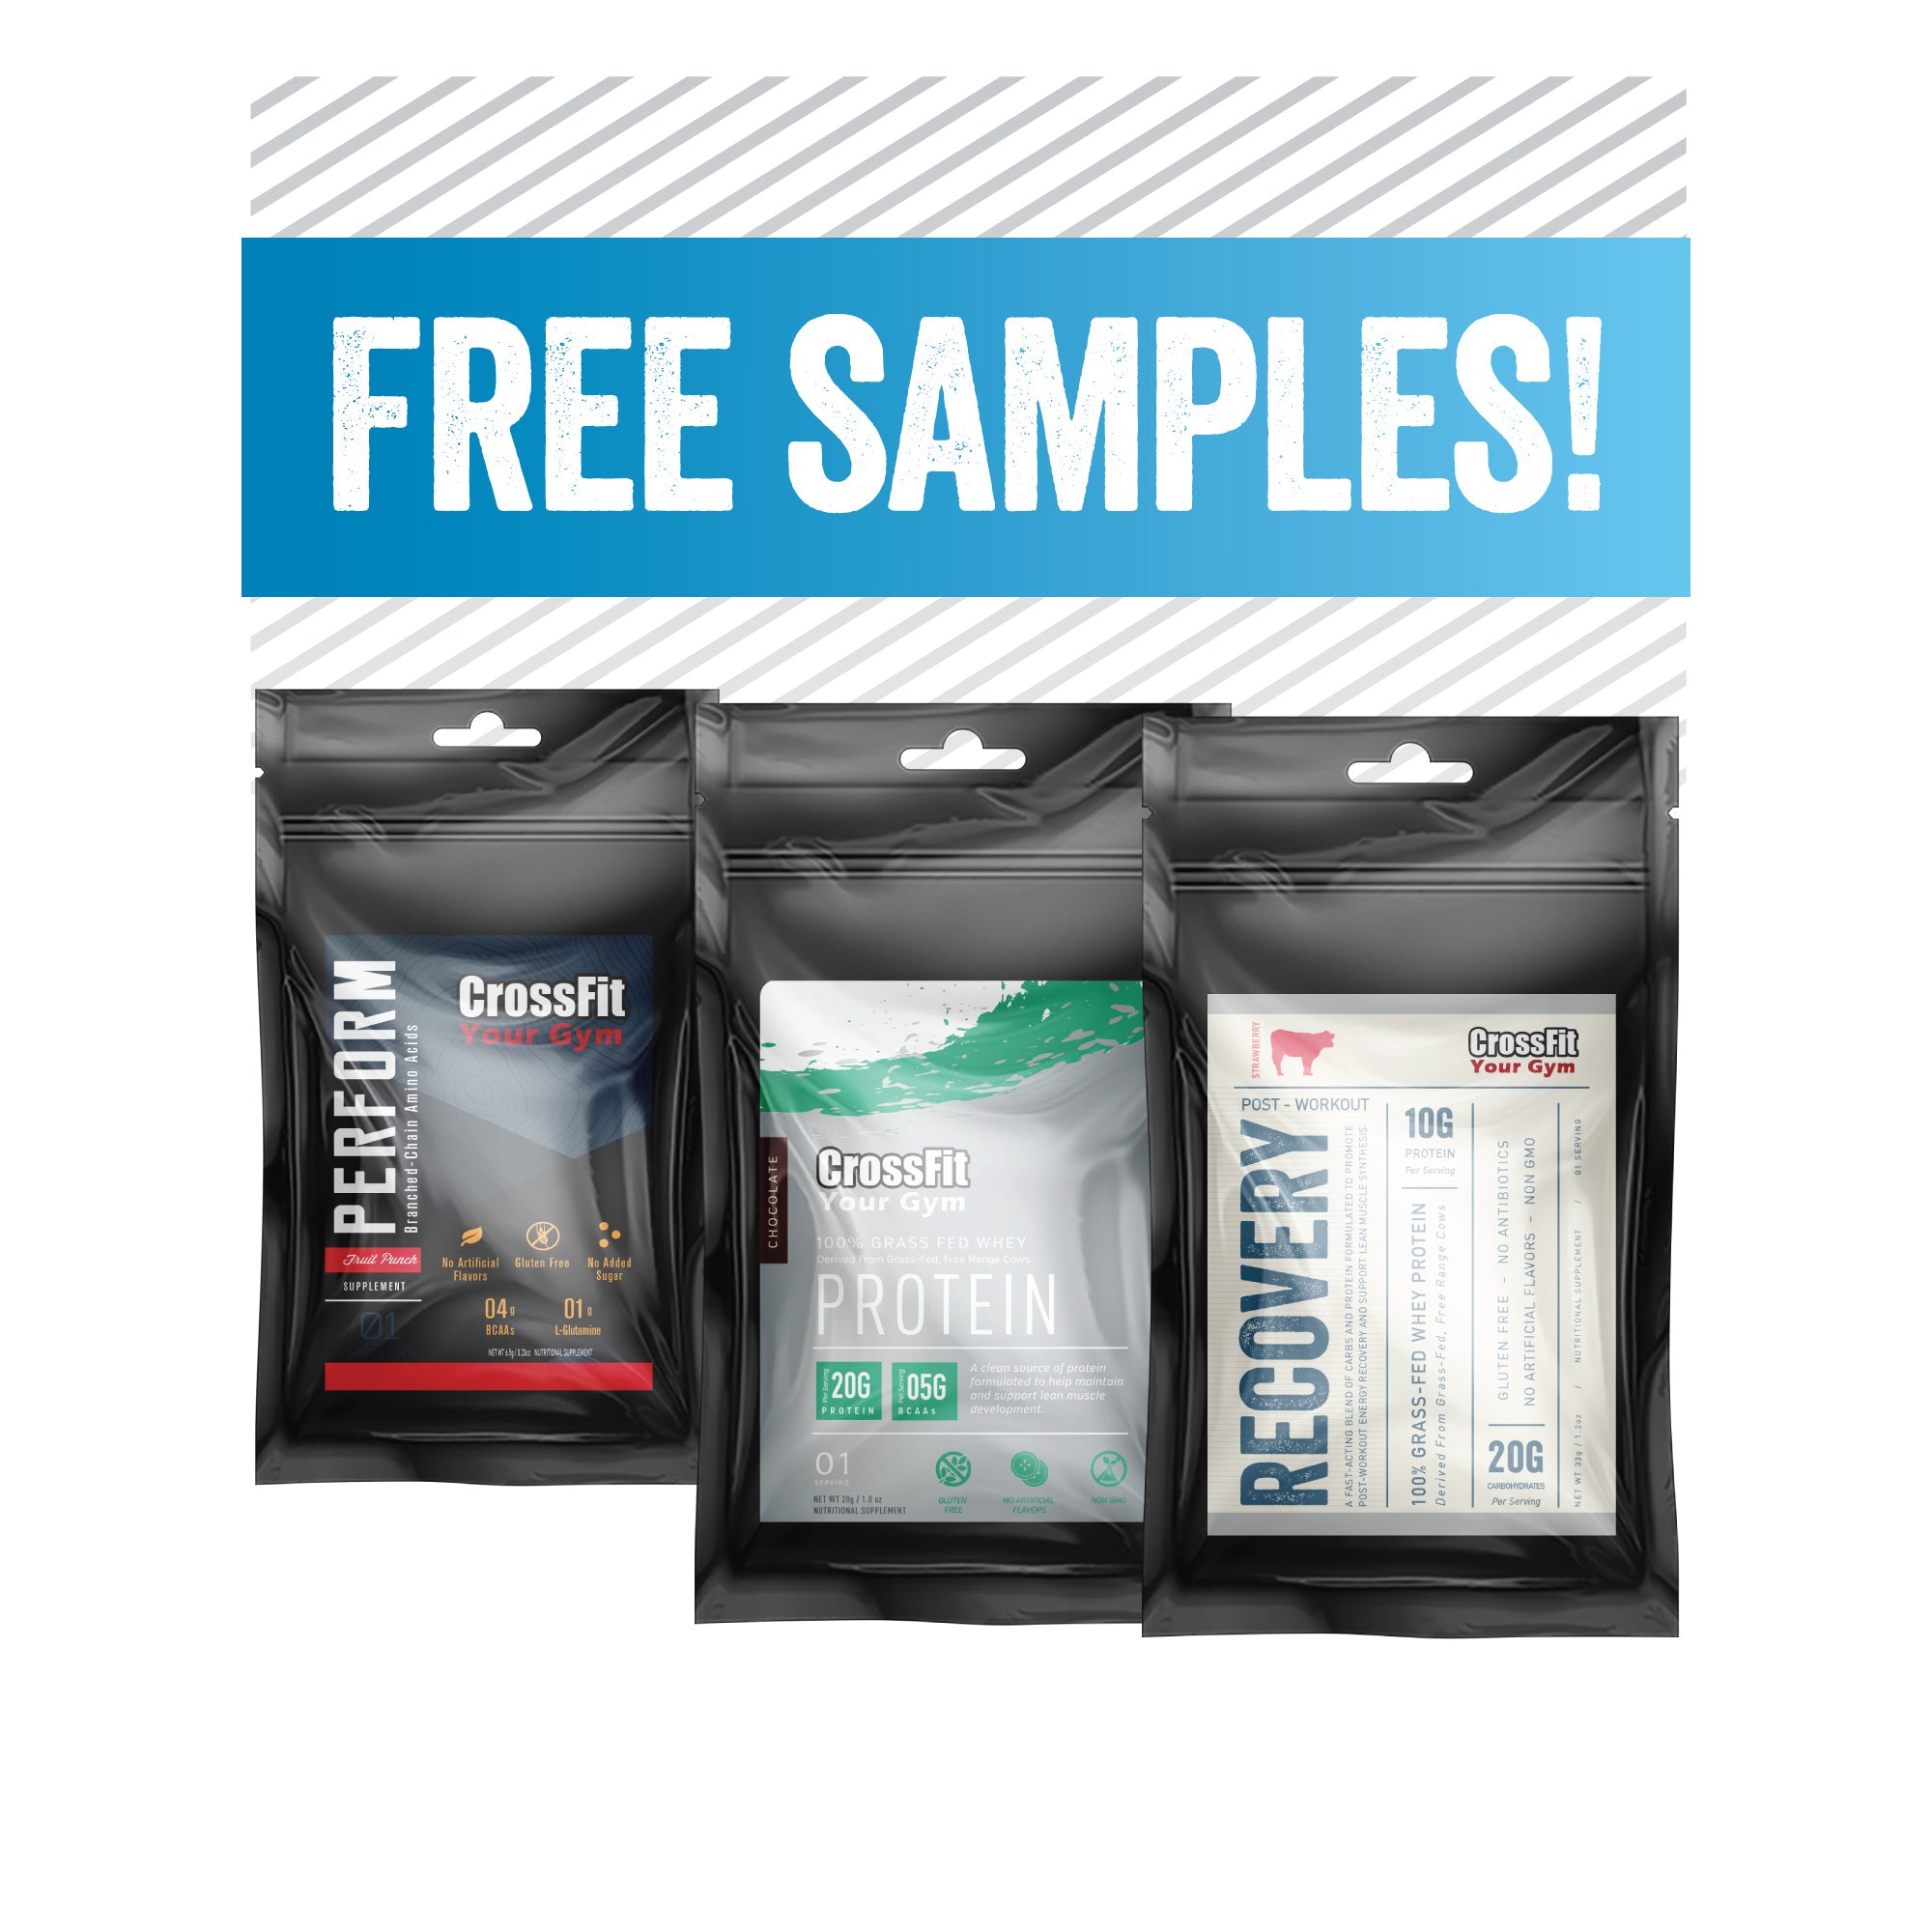 Sample supplements for free